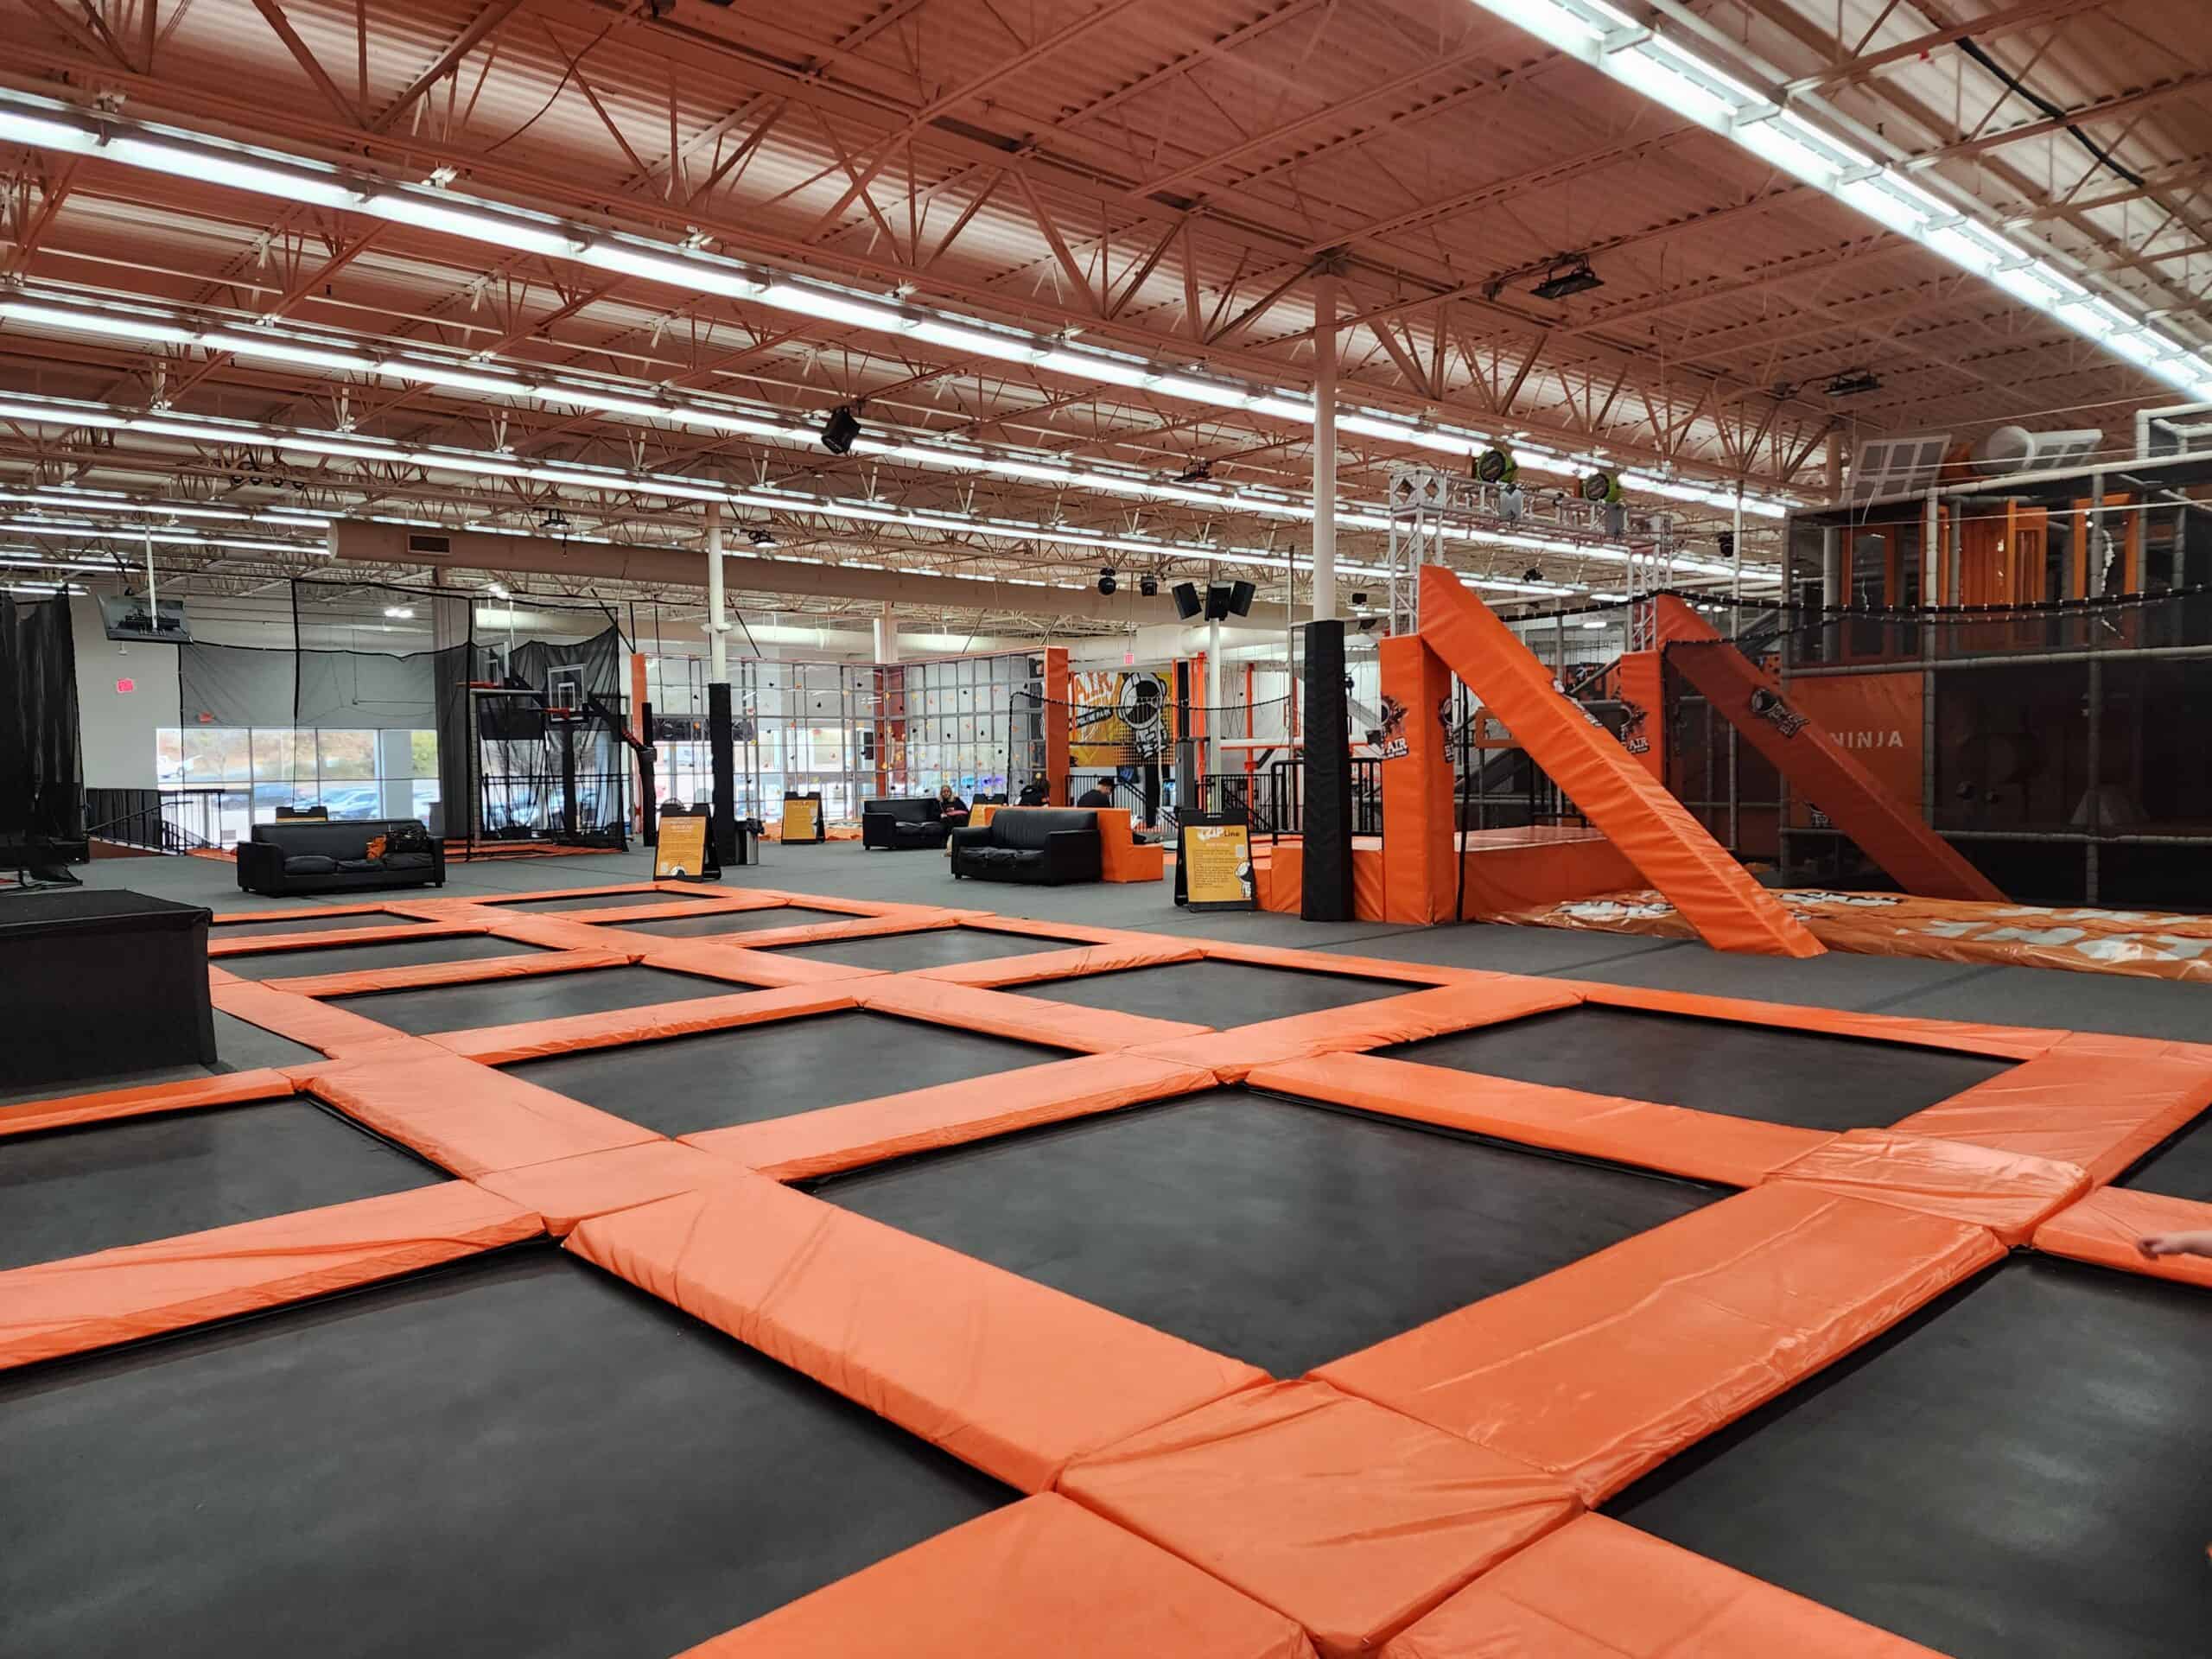 A spacious indoor trampoline park in Raleigh, NC, featuring a large grid of interconnected trampolines with black jumping surfaces and orange padding. The park includes various attractions like a basketball area, ninja course, and cushioned seating areas, providing a fun and dynamic environment for visitors.